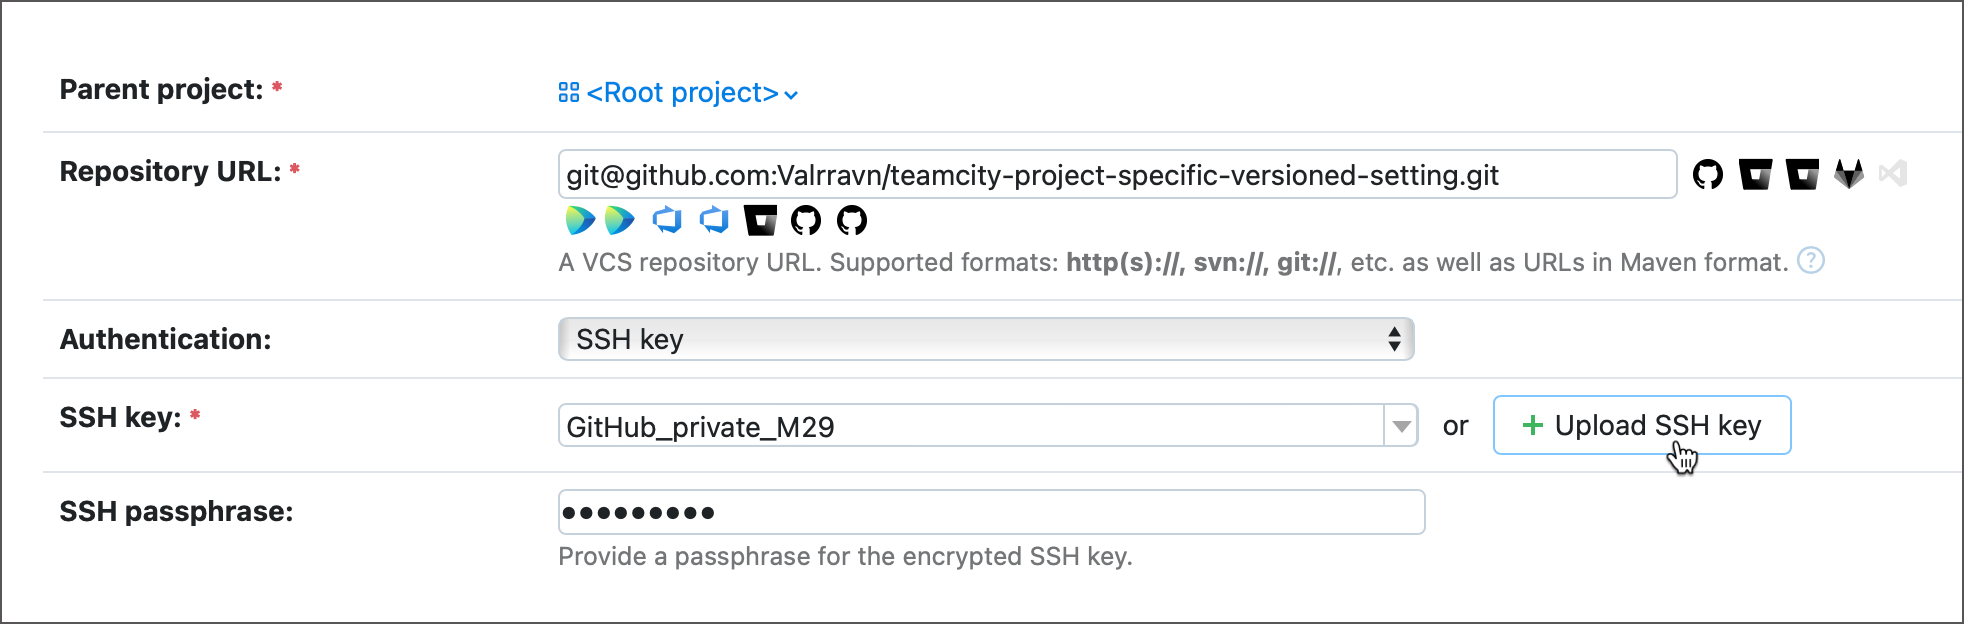 Upload SSH key on new project page